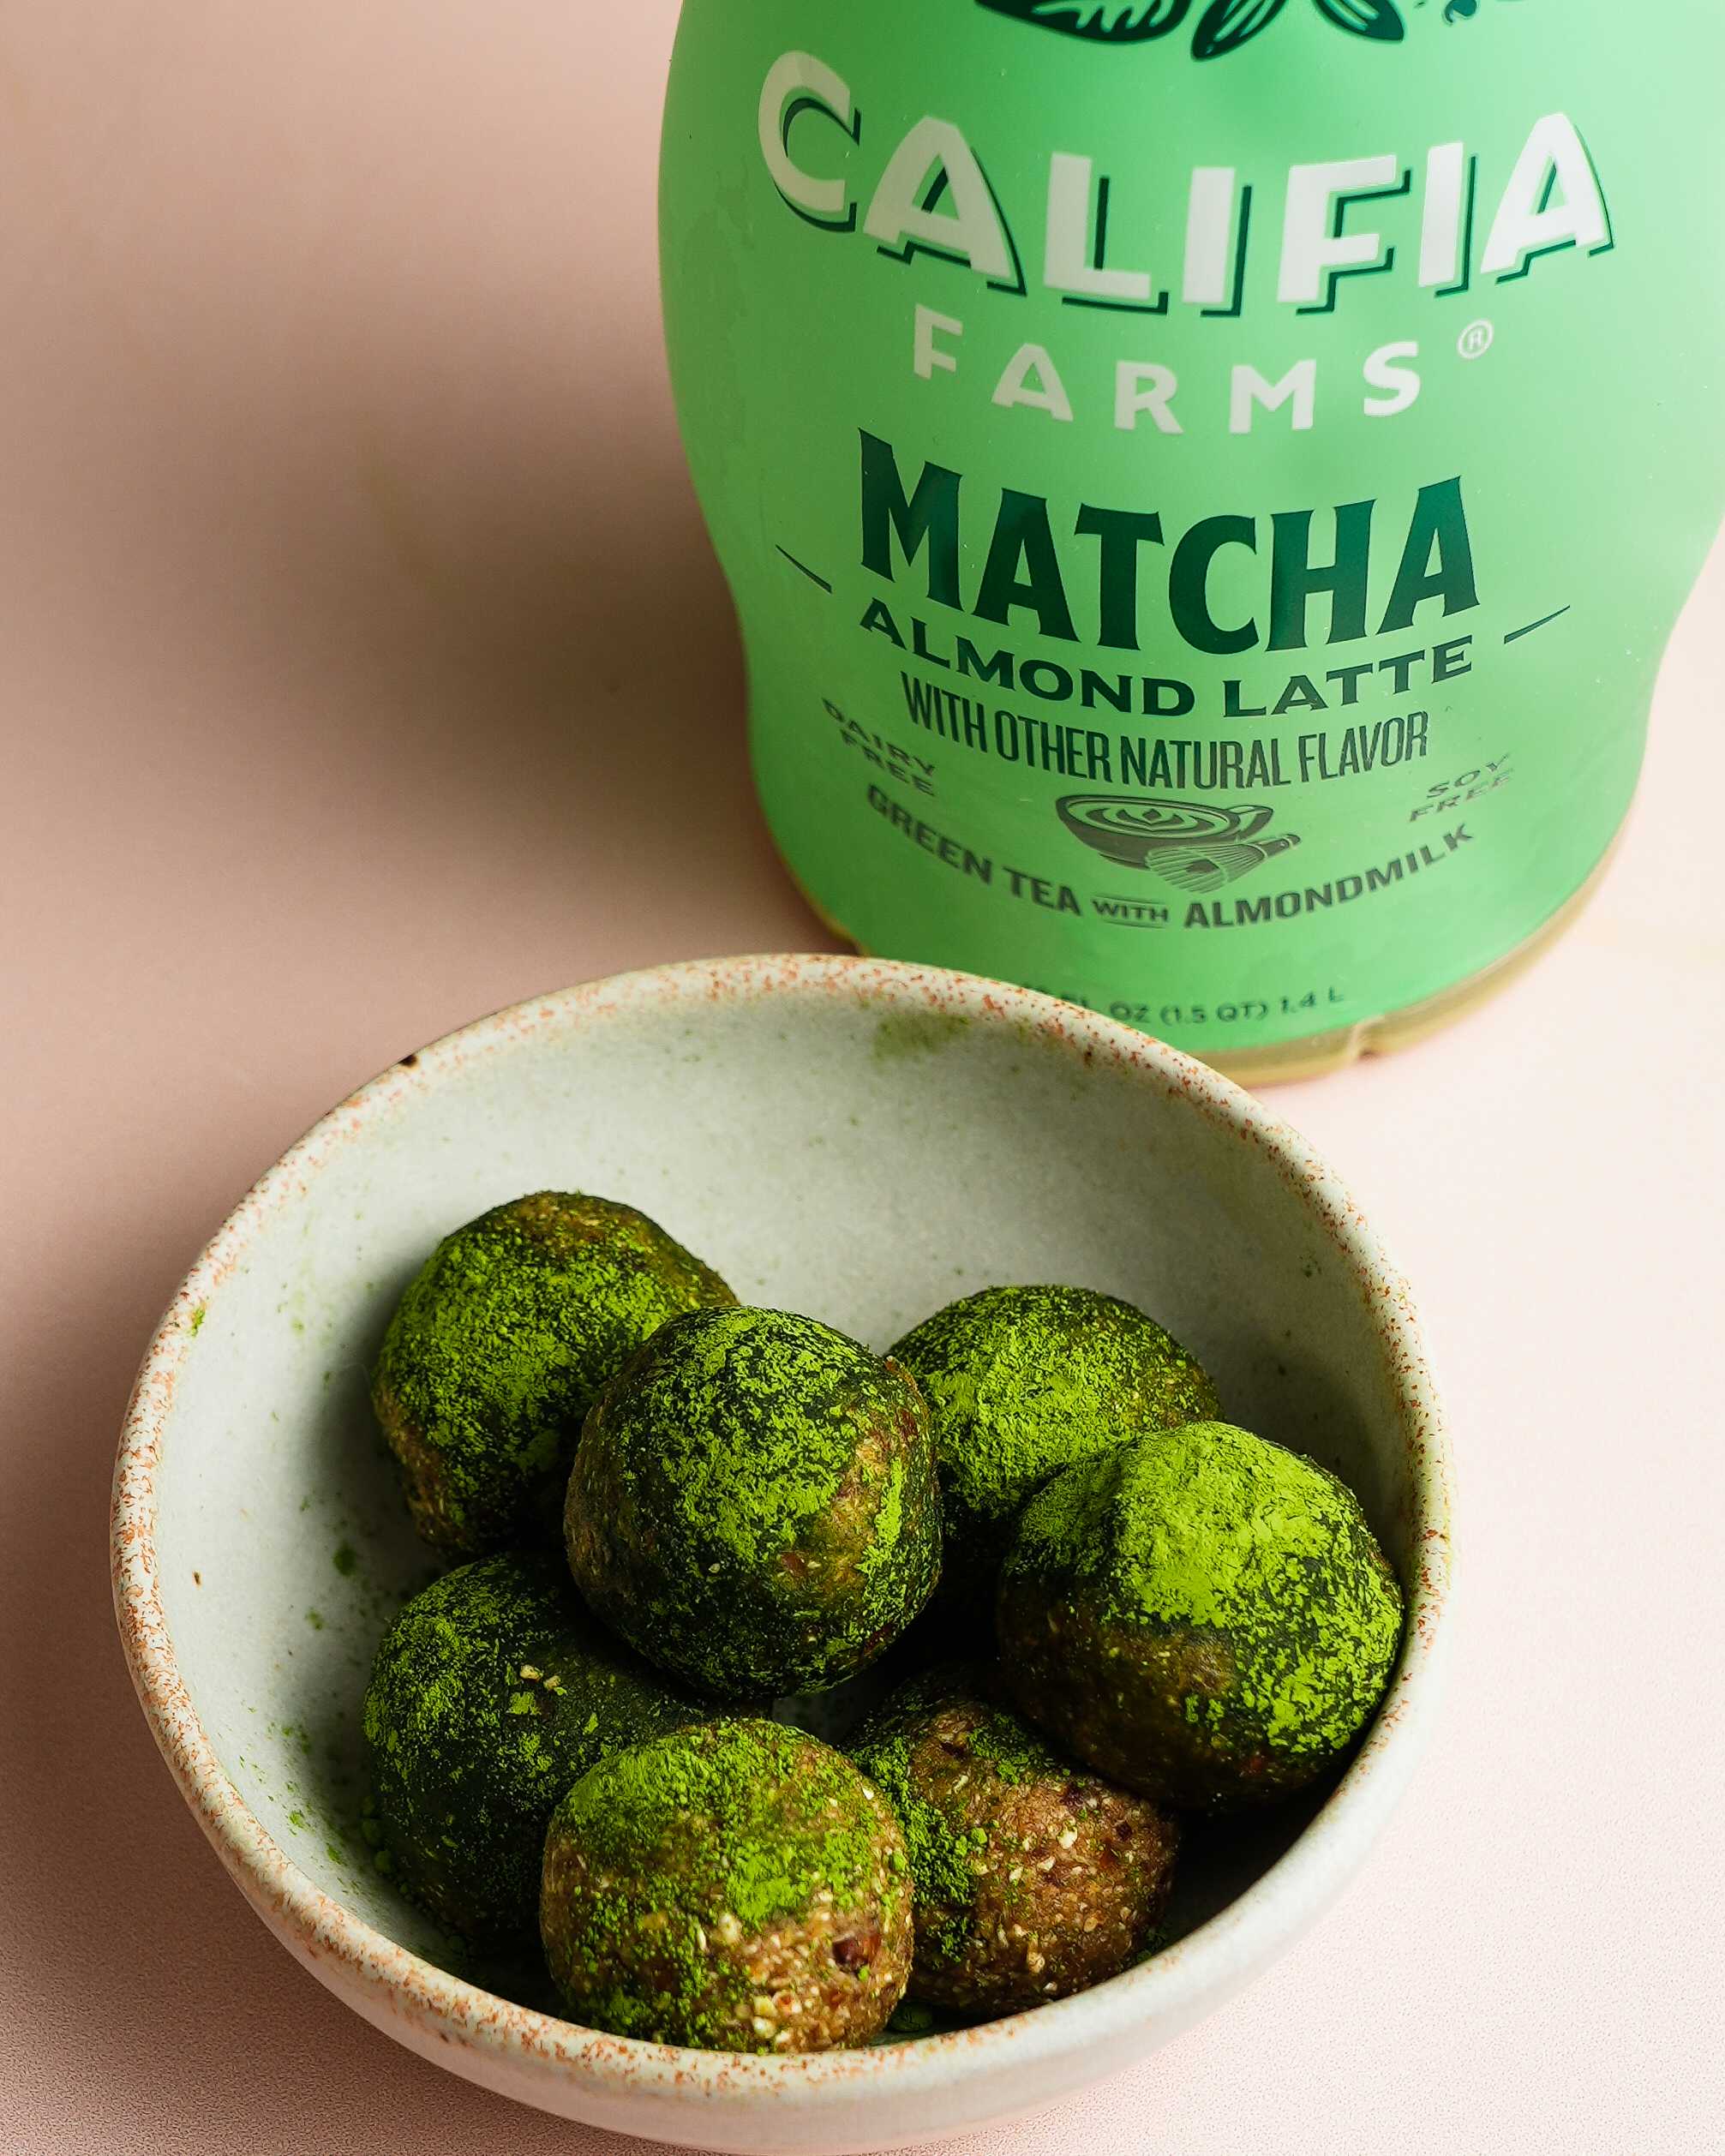 Homemade matcha energy balls sit in a bowl at the front of the image, with Califia Farms Matcha Latte in the background.